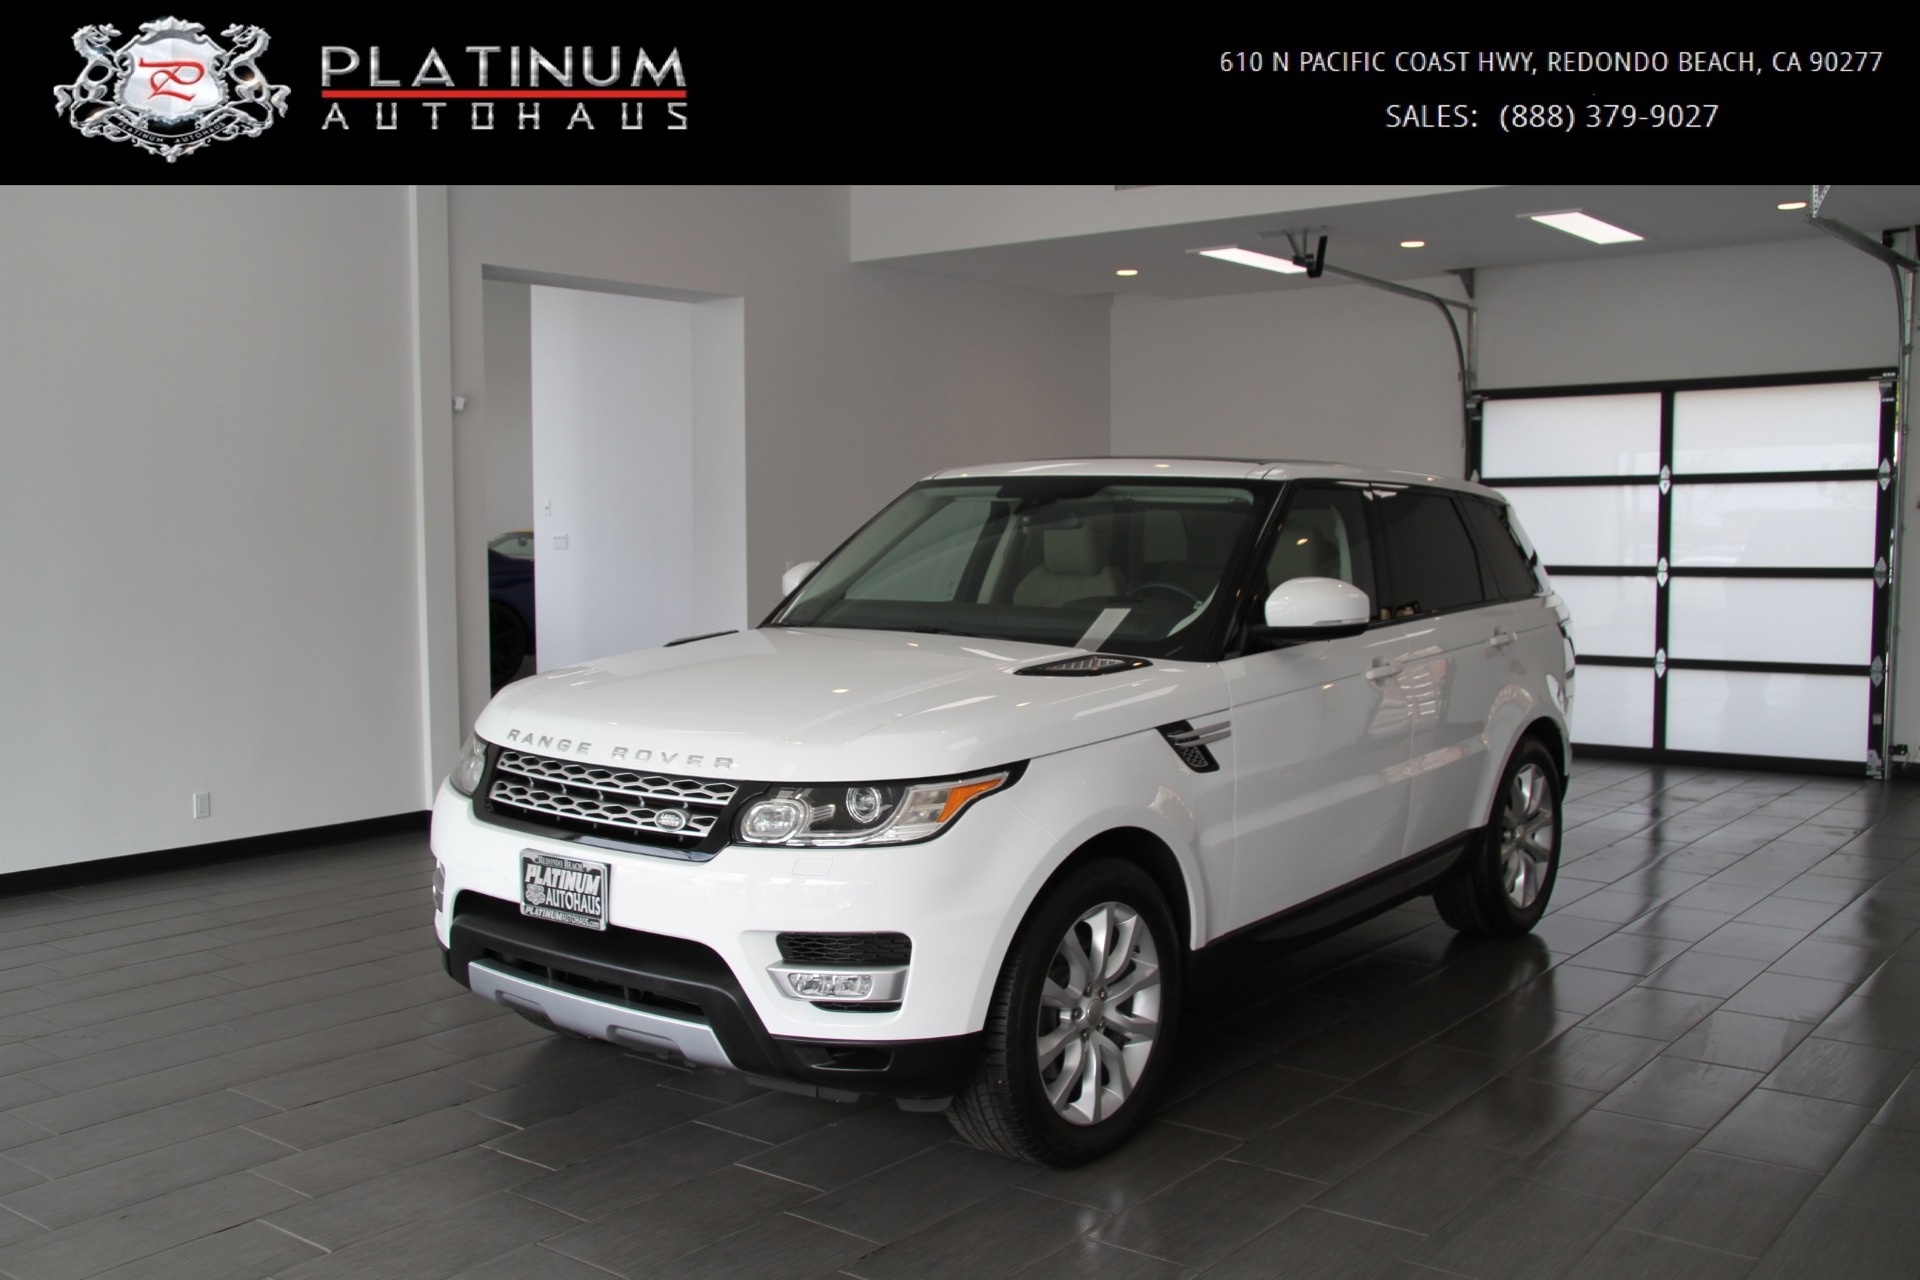 Black Range Rover Sport For Sale Near Me  . See 391 Results For Land Rover Range Rover Sport For Sale At The Best Prices, With The Cheapest Used Car Starting From $ 10,995.